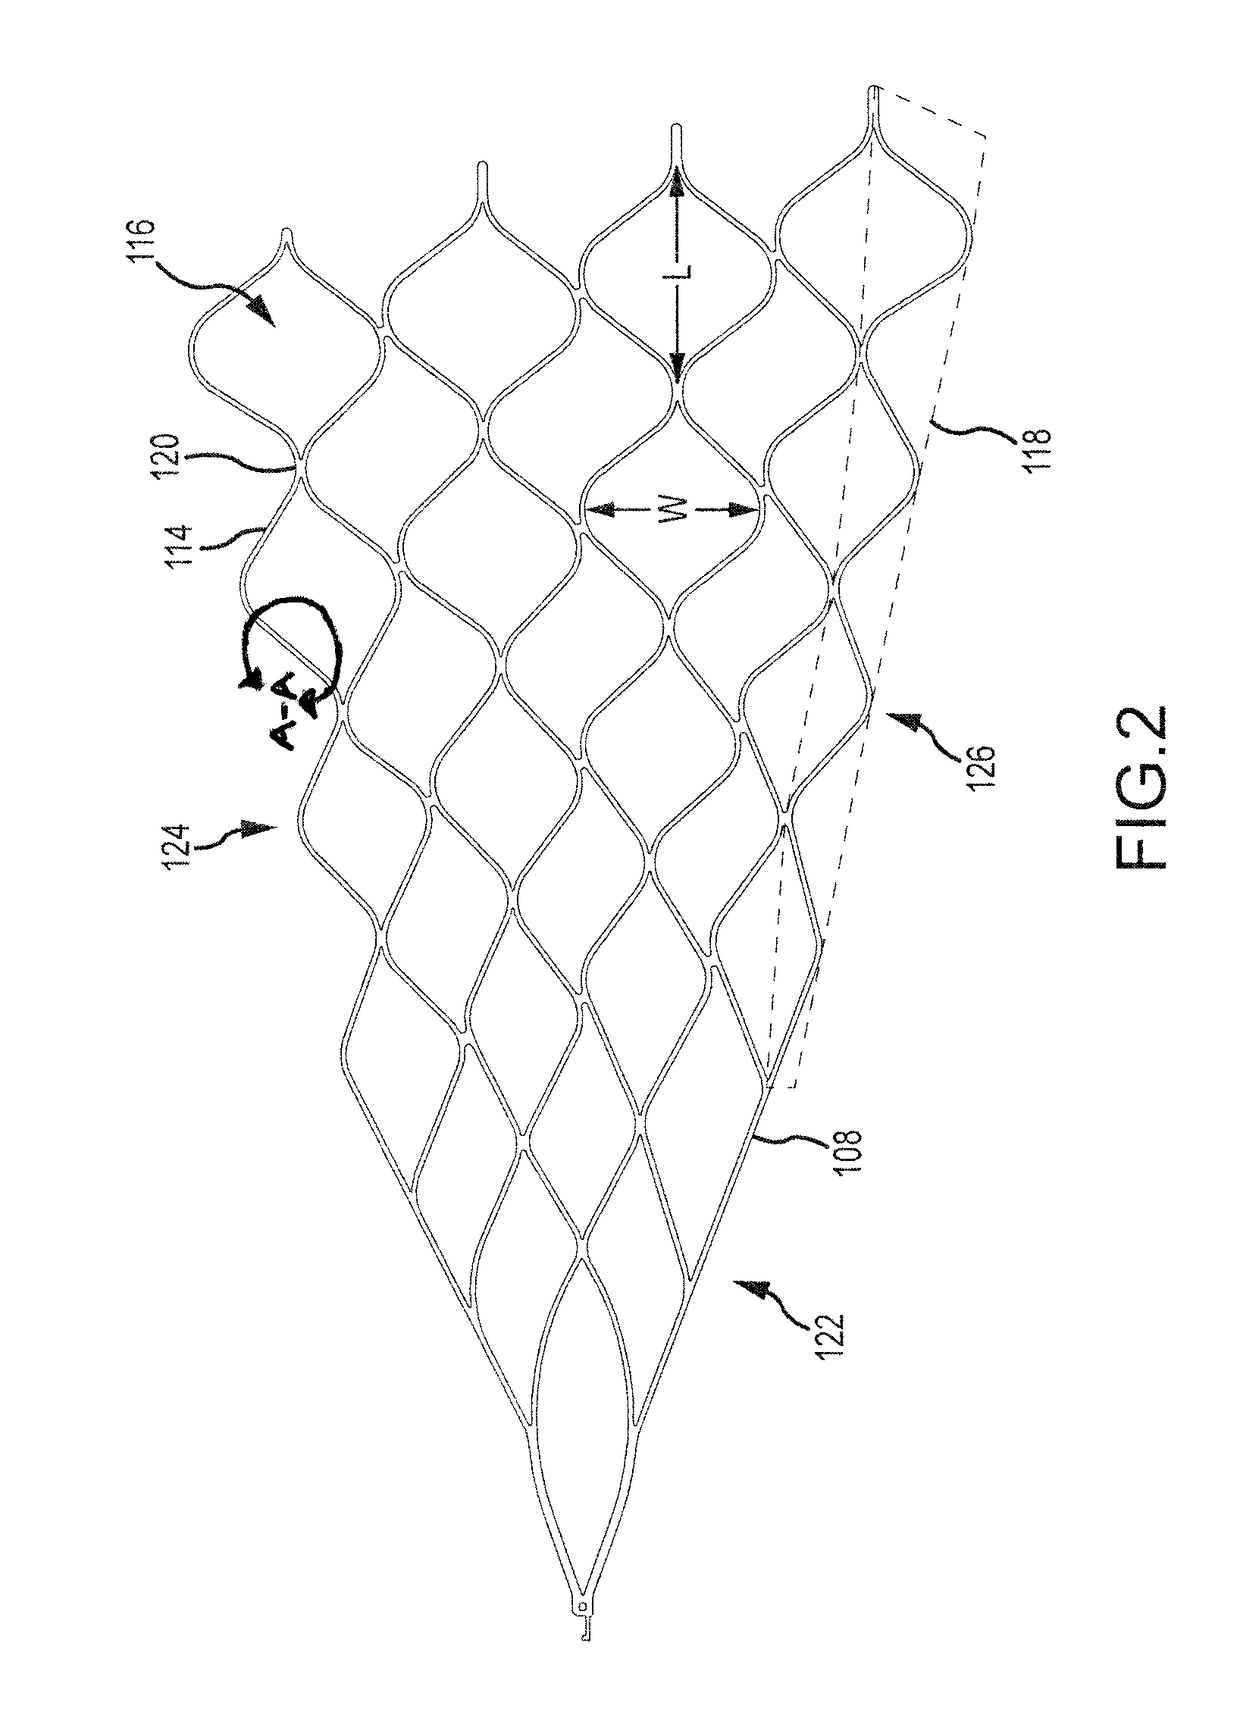 Galvanically assisted attachment of medical devices to thrombus